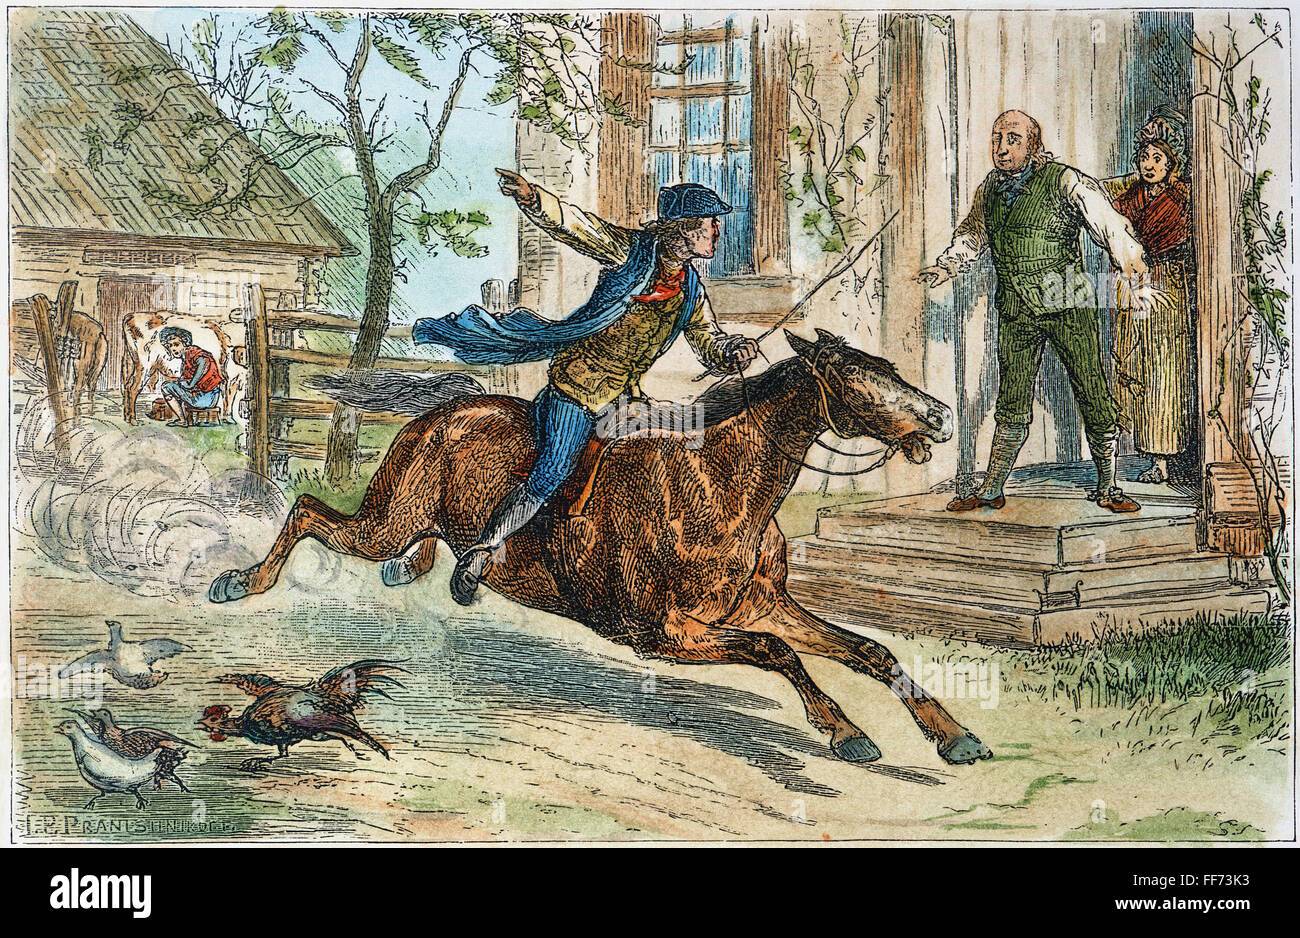 PAUL REVERE'S RIDE /nfrom Boston to Lexington, April 18, 1775. Color engraving, 19th century. Stock Photo